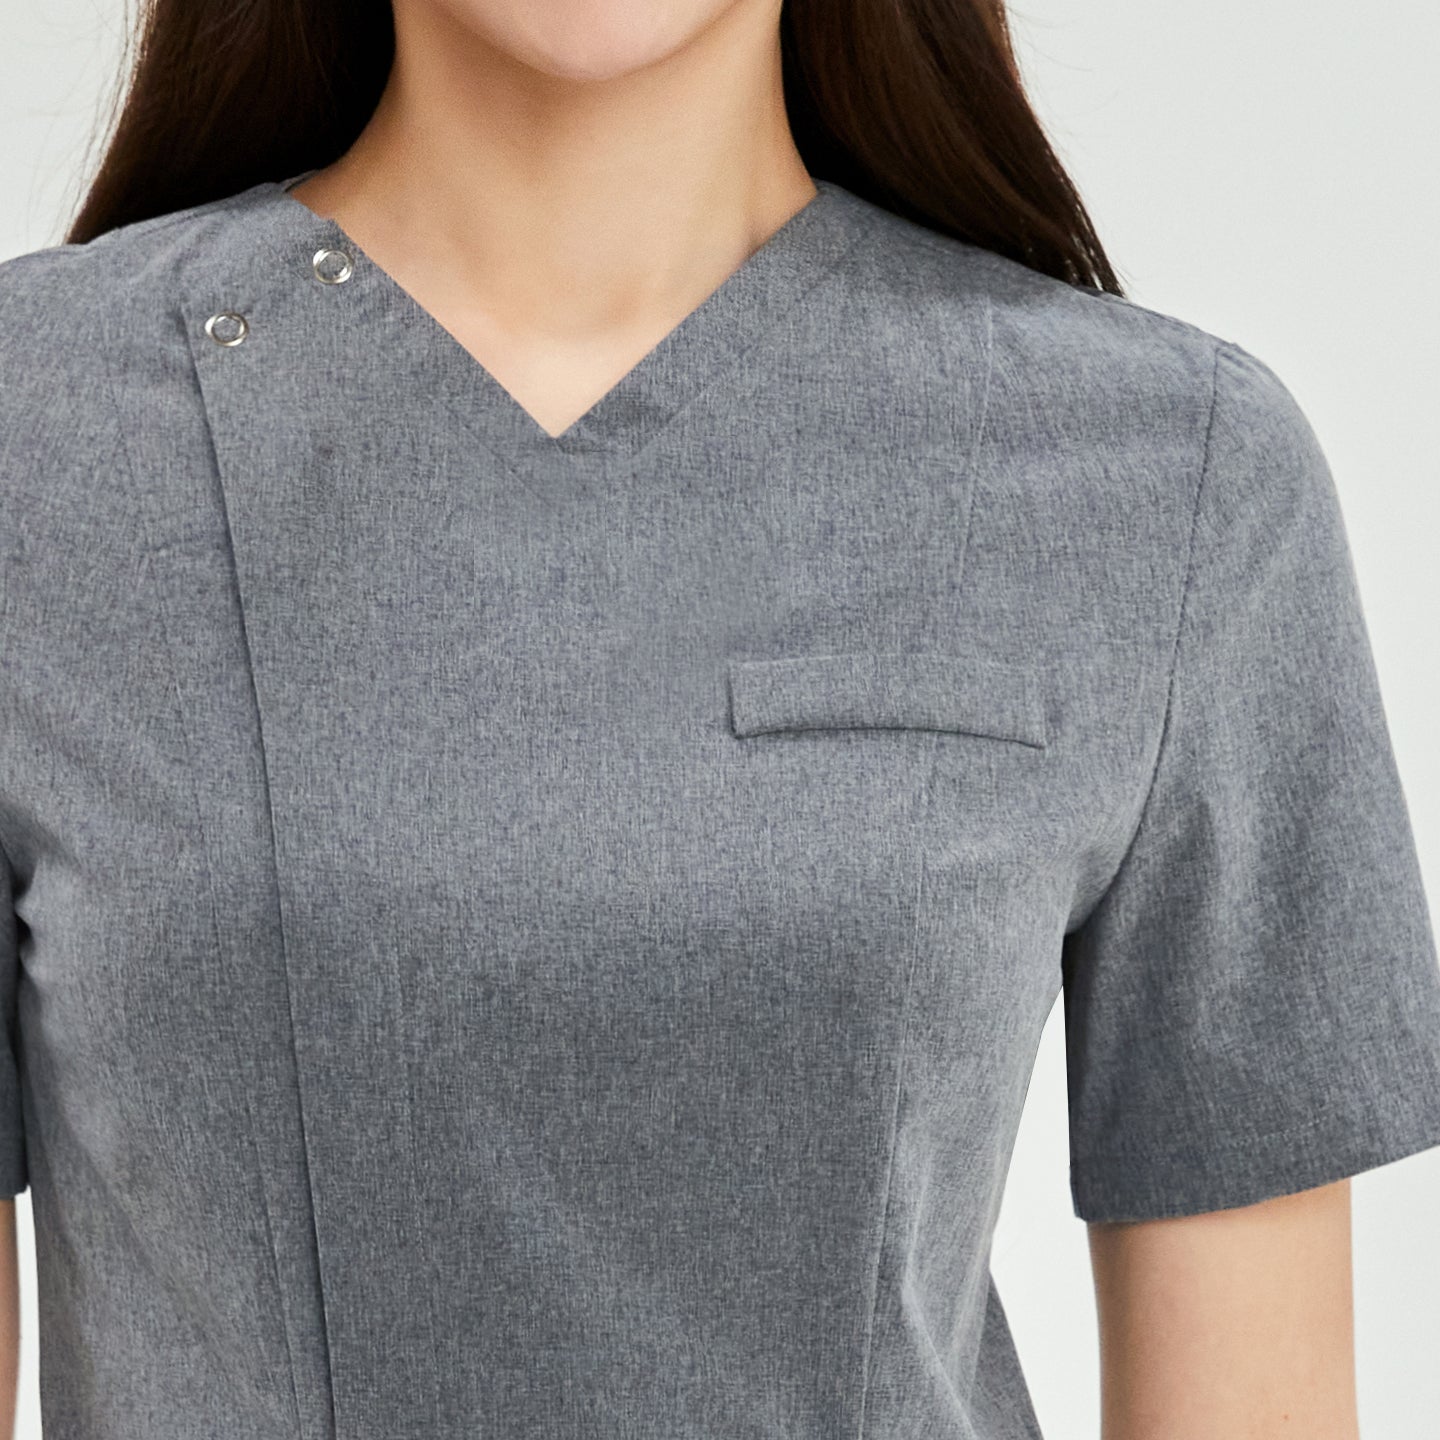 Close-up of the neck detail on a soft gray Zenir front zipper scrub top worn by a woman,Soft Gray